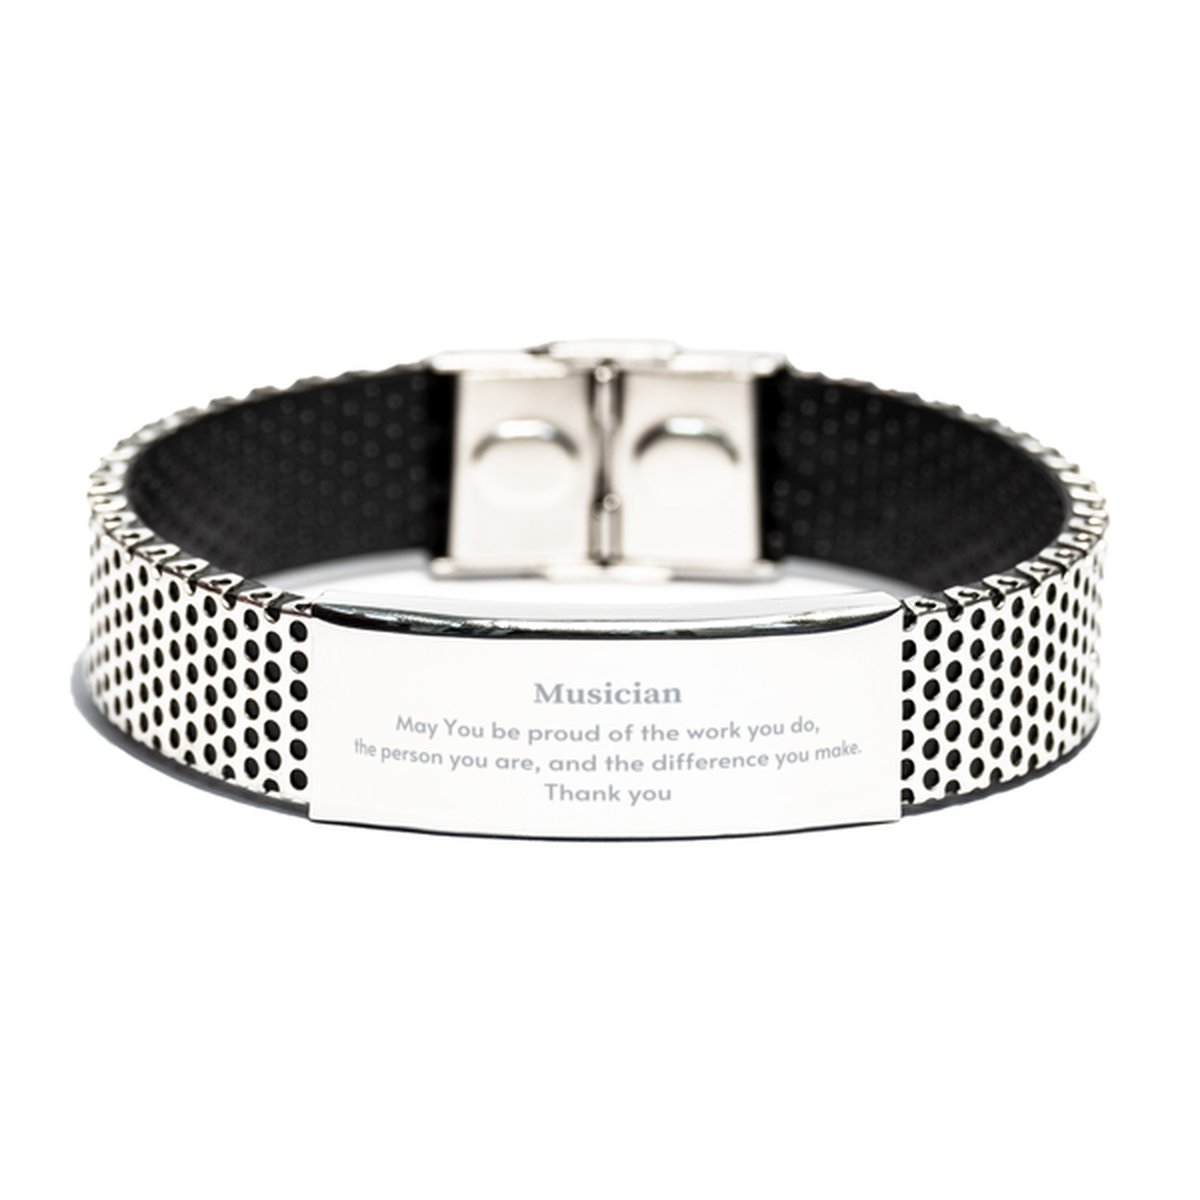 Heartwarming Stainless Steel Bracelet Retirement Coworkers Gifts for Musician, Musician May You be proud of the work you do, the person you are Gifts for Boss Men Women Friends